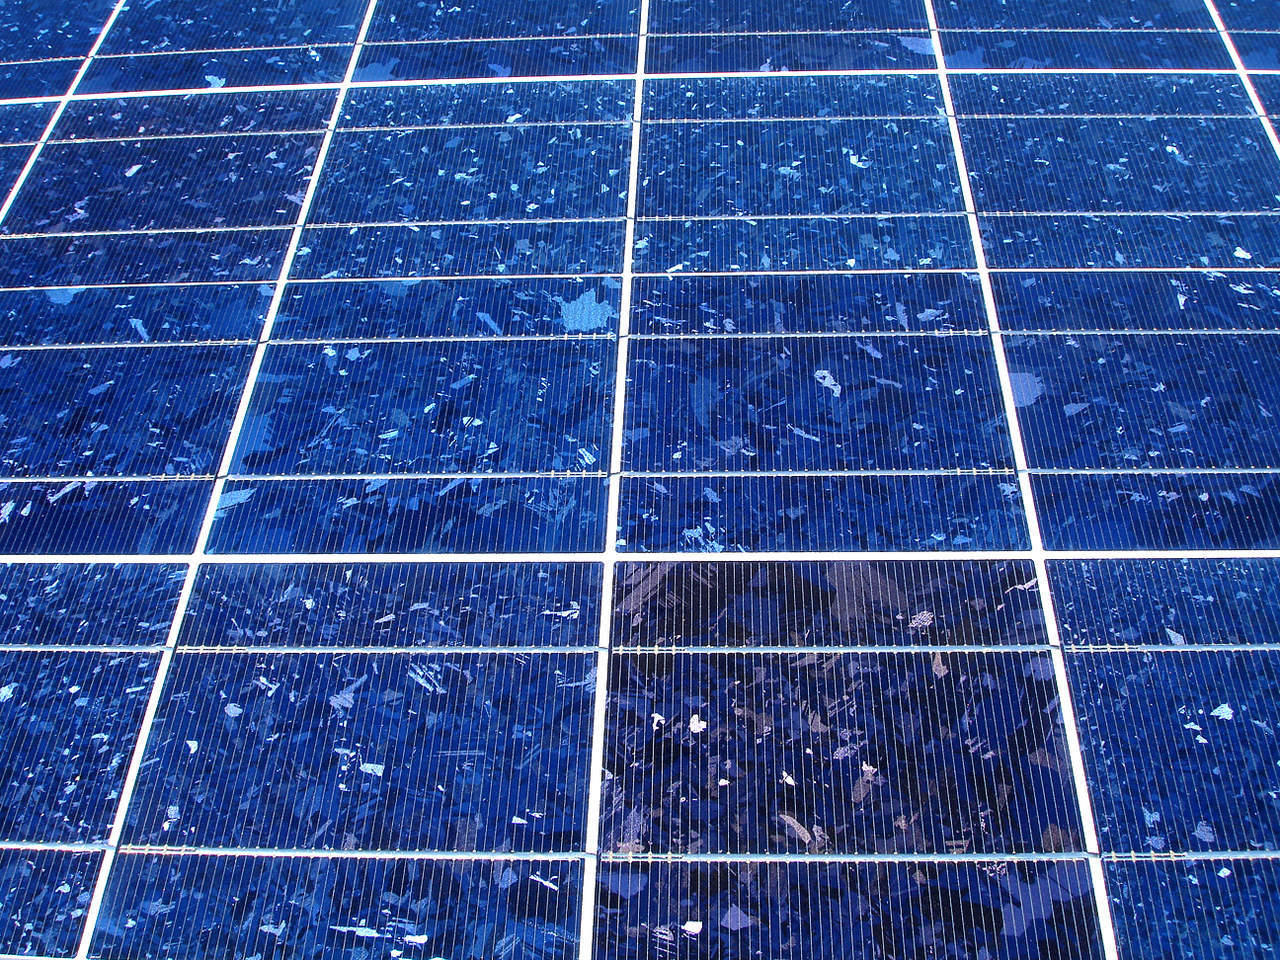 Ellomay Capital seeks funding from EIB to construct 300MW solar plant in Spain